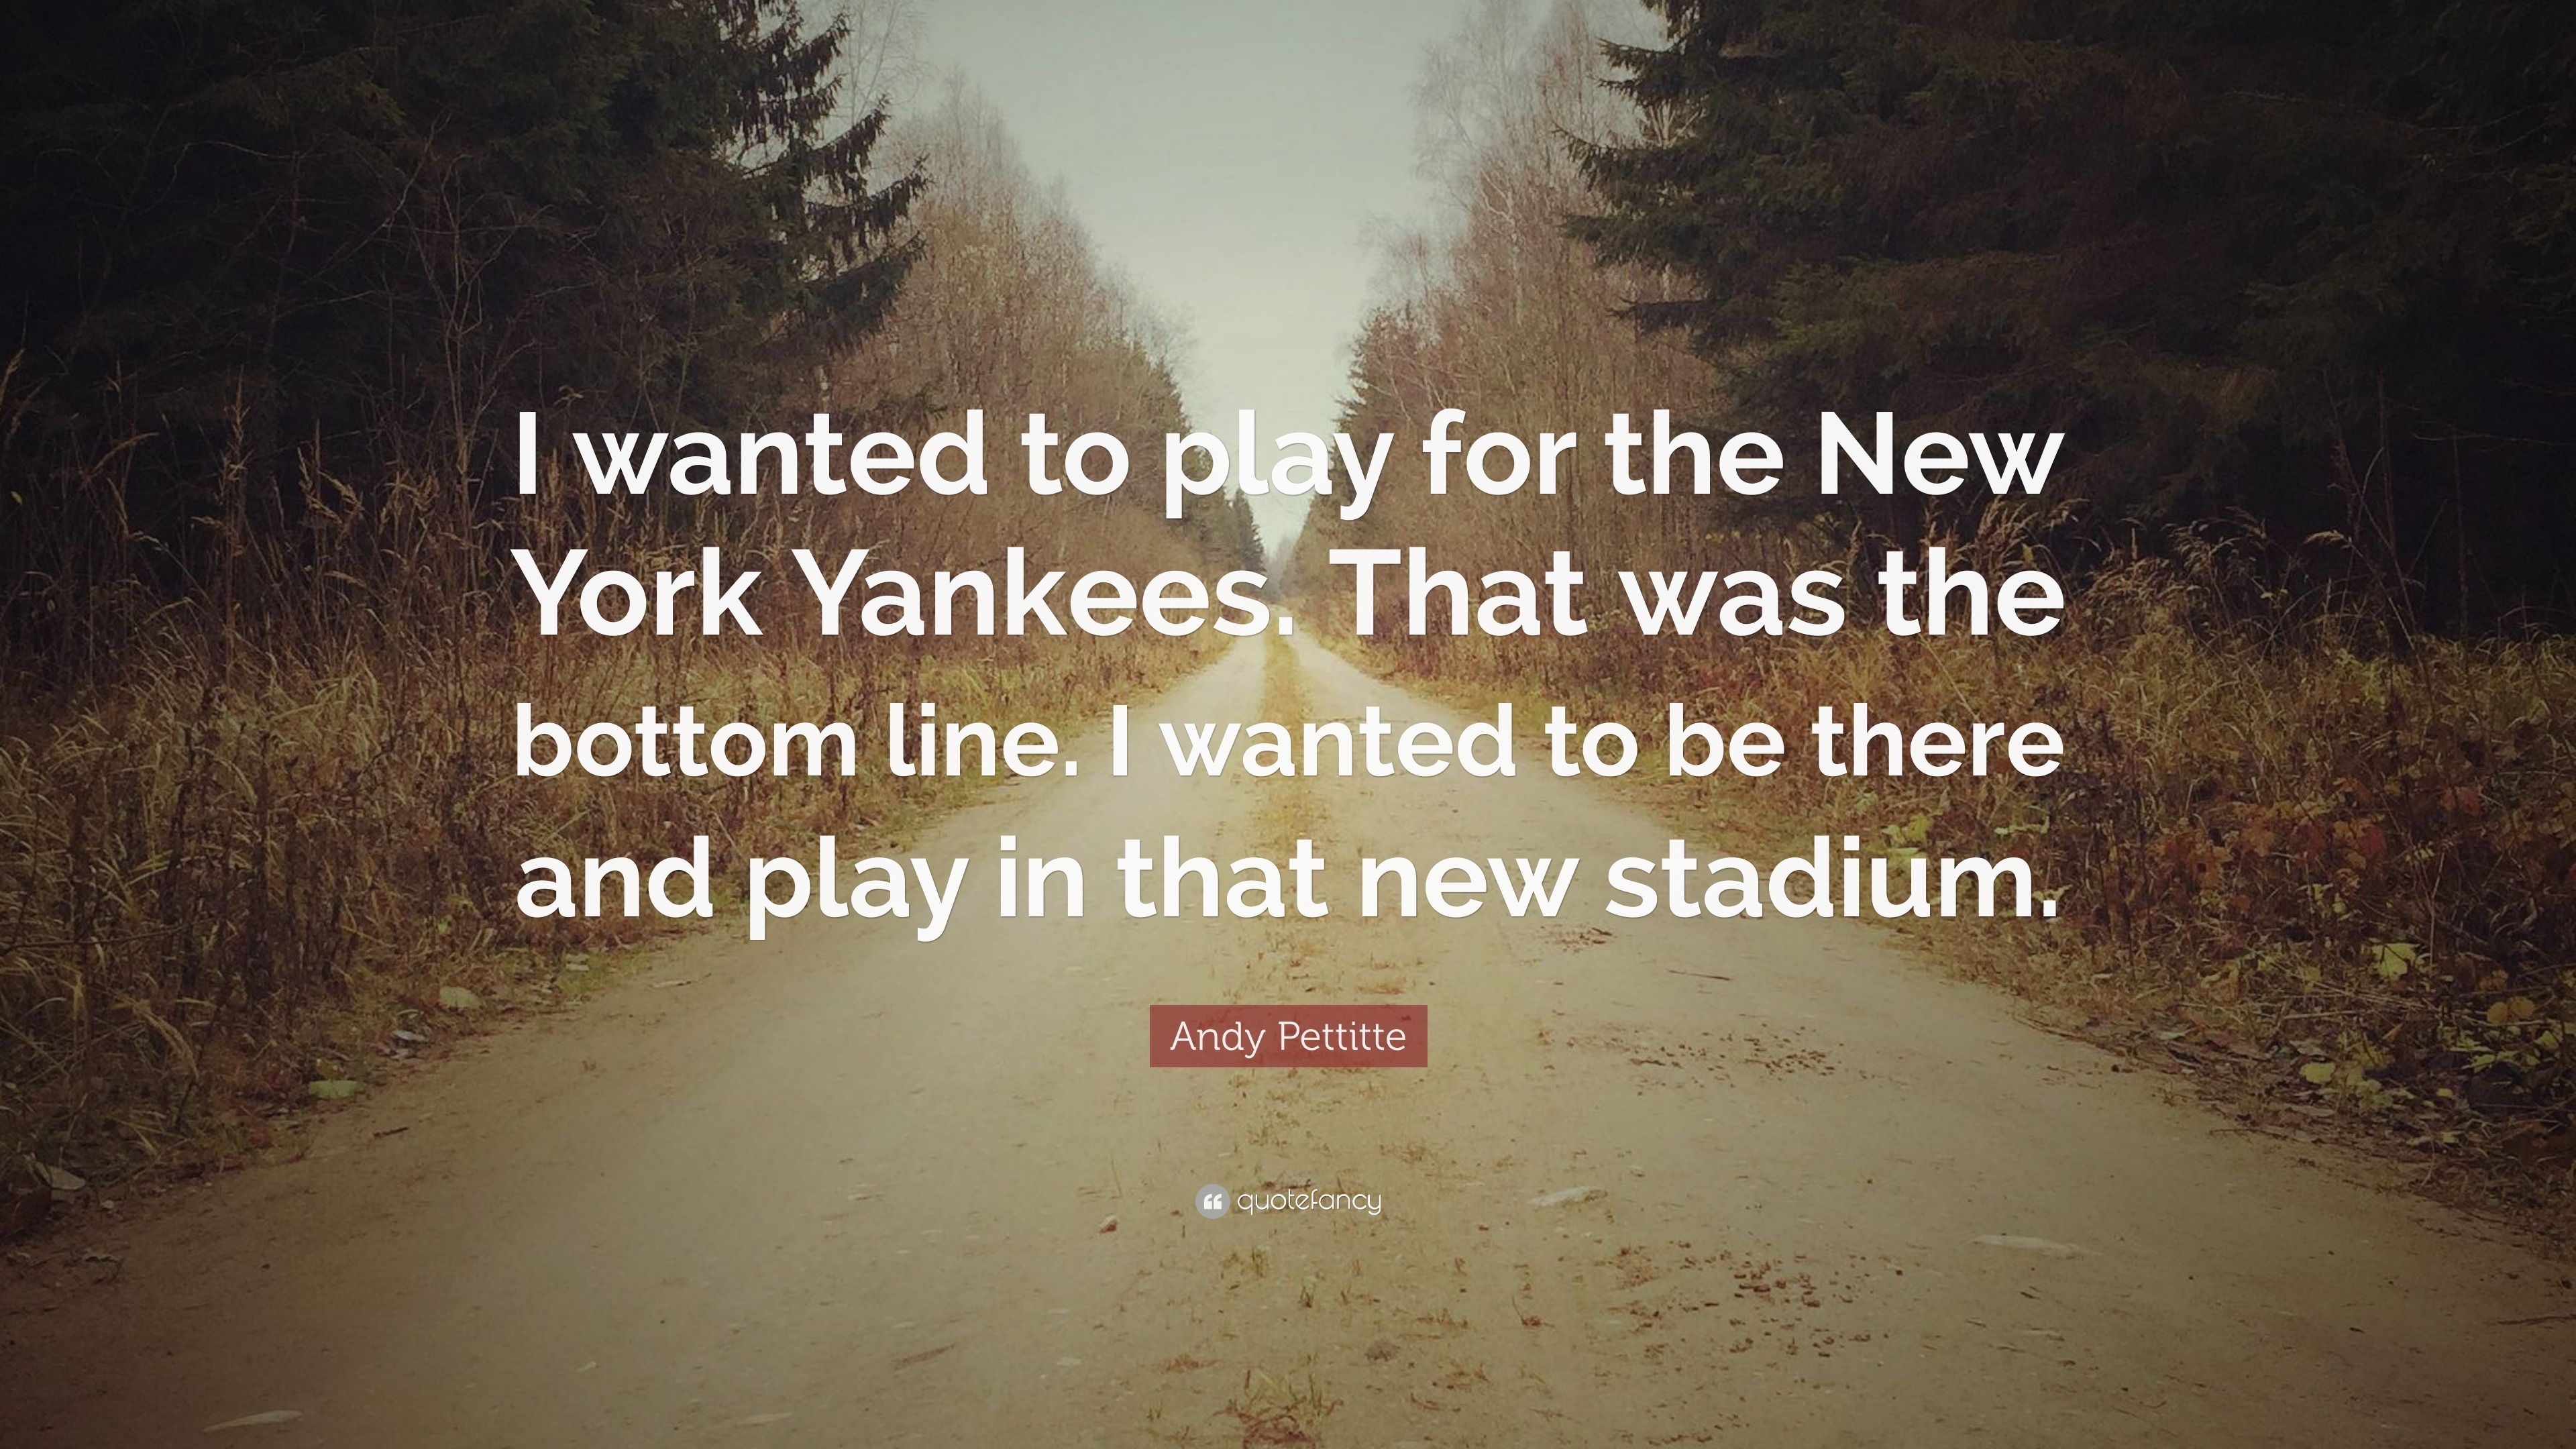 Andy Pettitte Quote: “I wanted to play for the New York Yankees